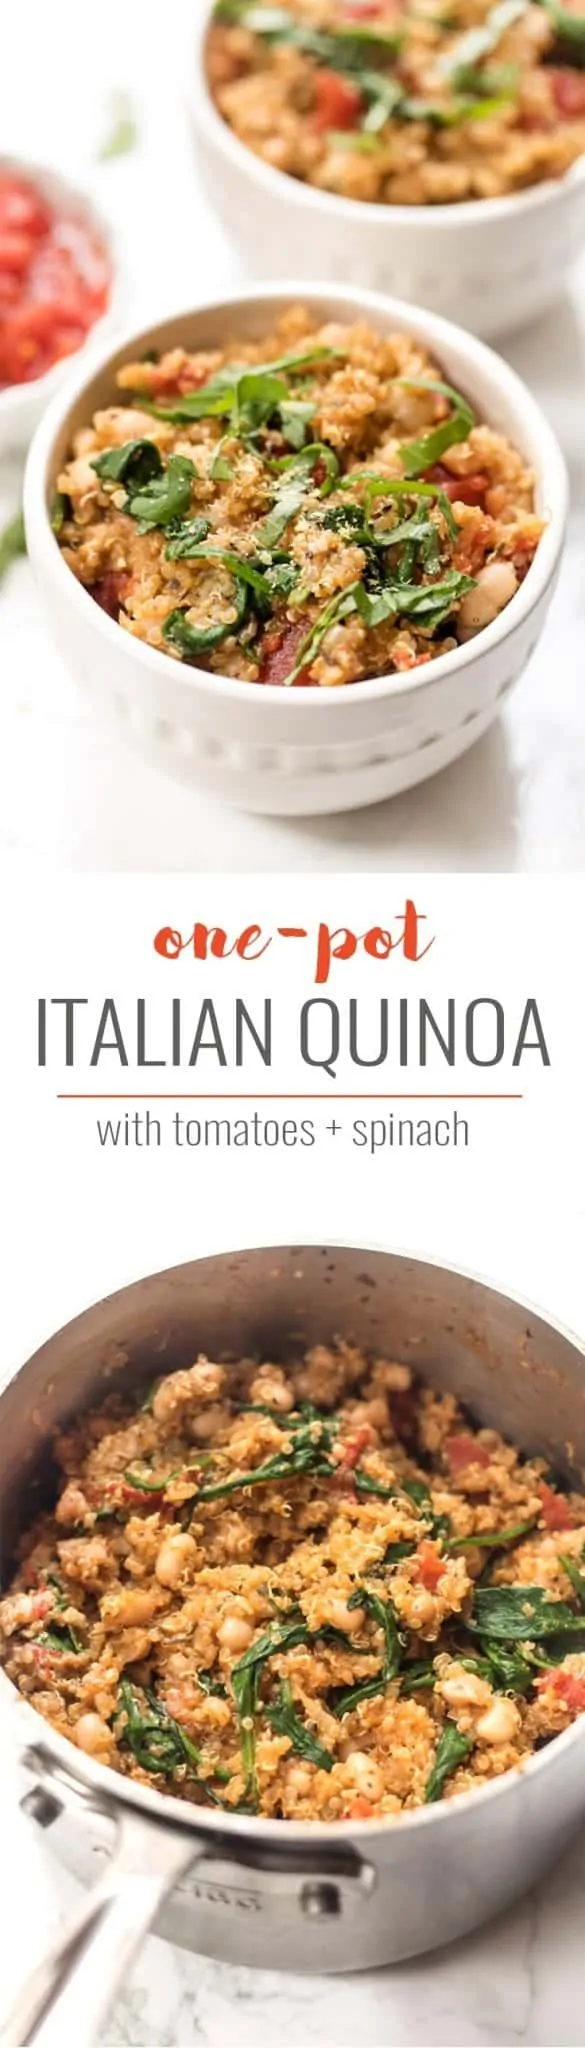 one pot italian quinoa with spinach and tomatoes